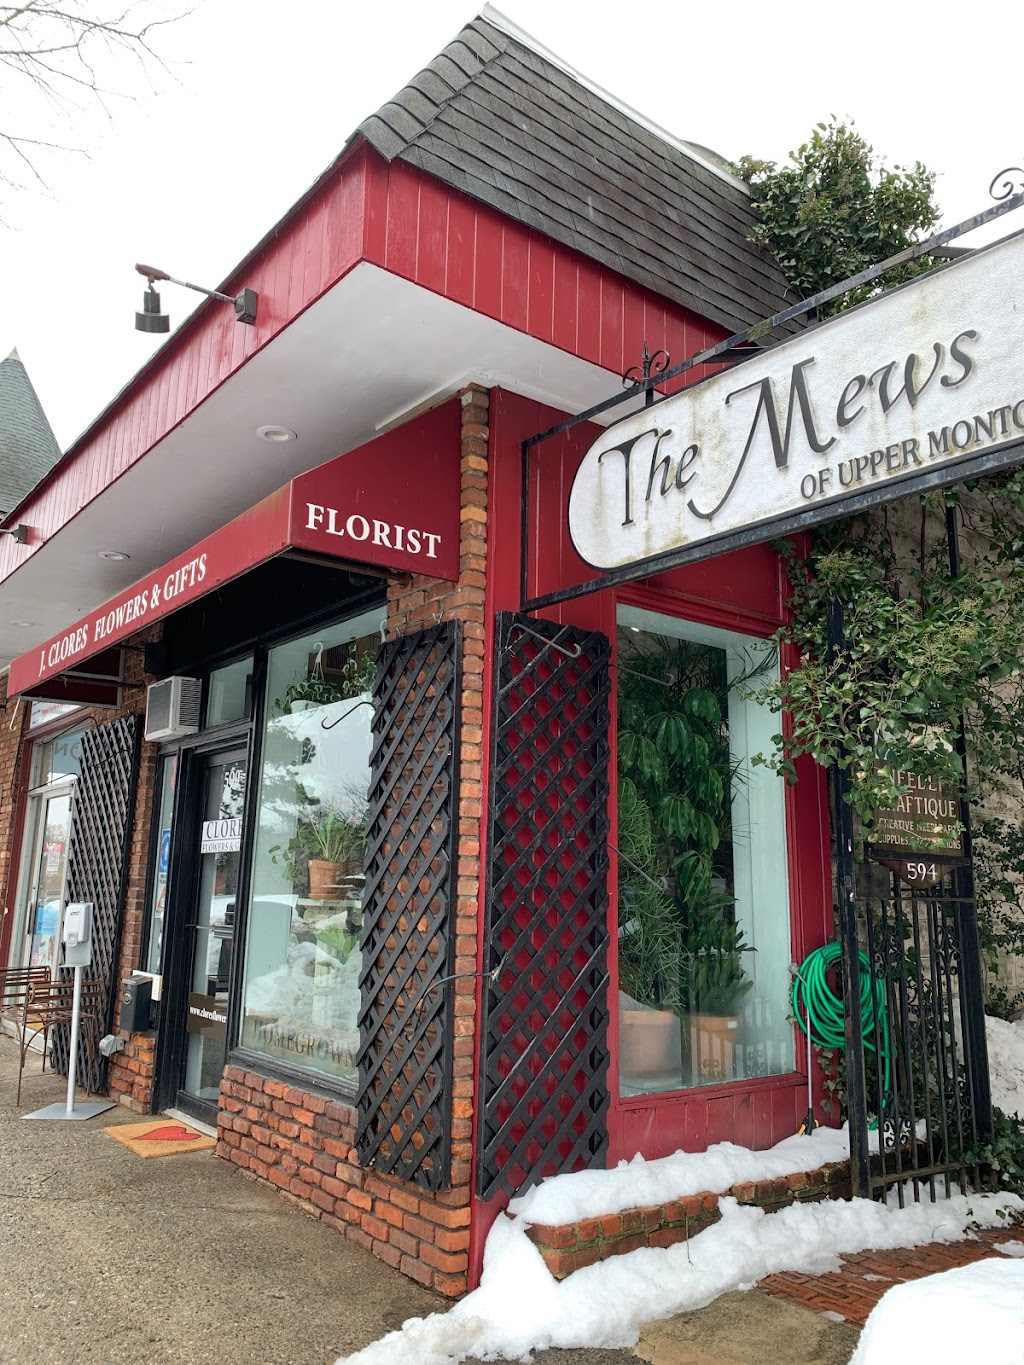 Clores Flowers & Gifts | 590 Valley Rd, Montclair, NJ 07043 | Phone: (973) 744-2291